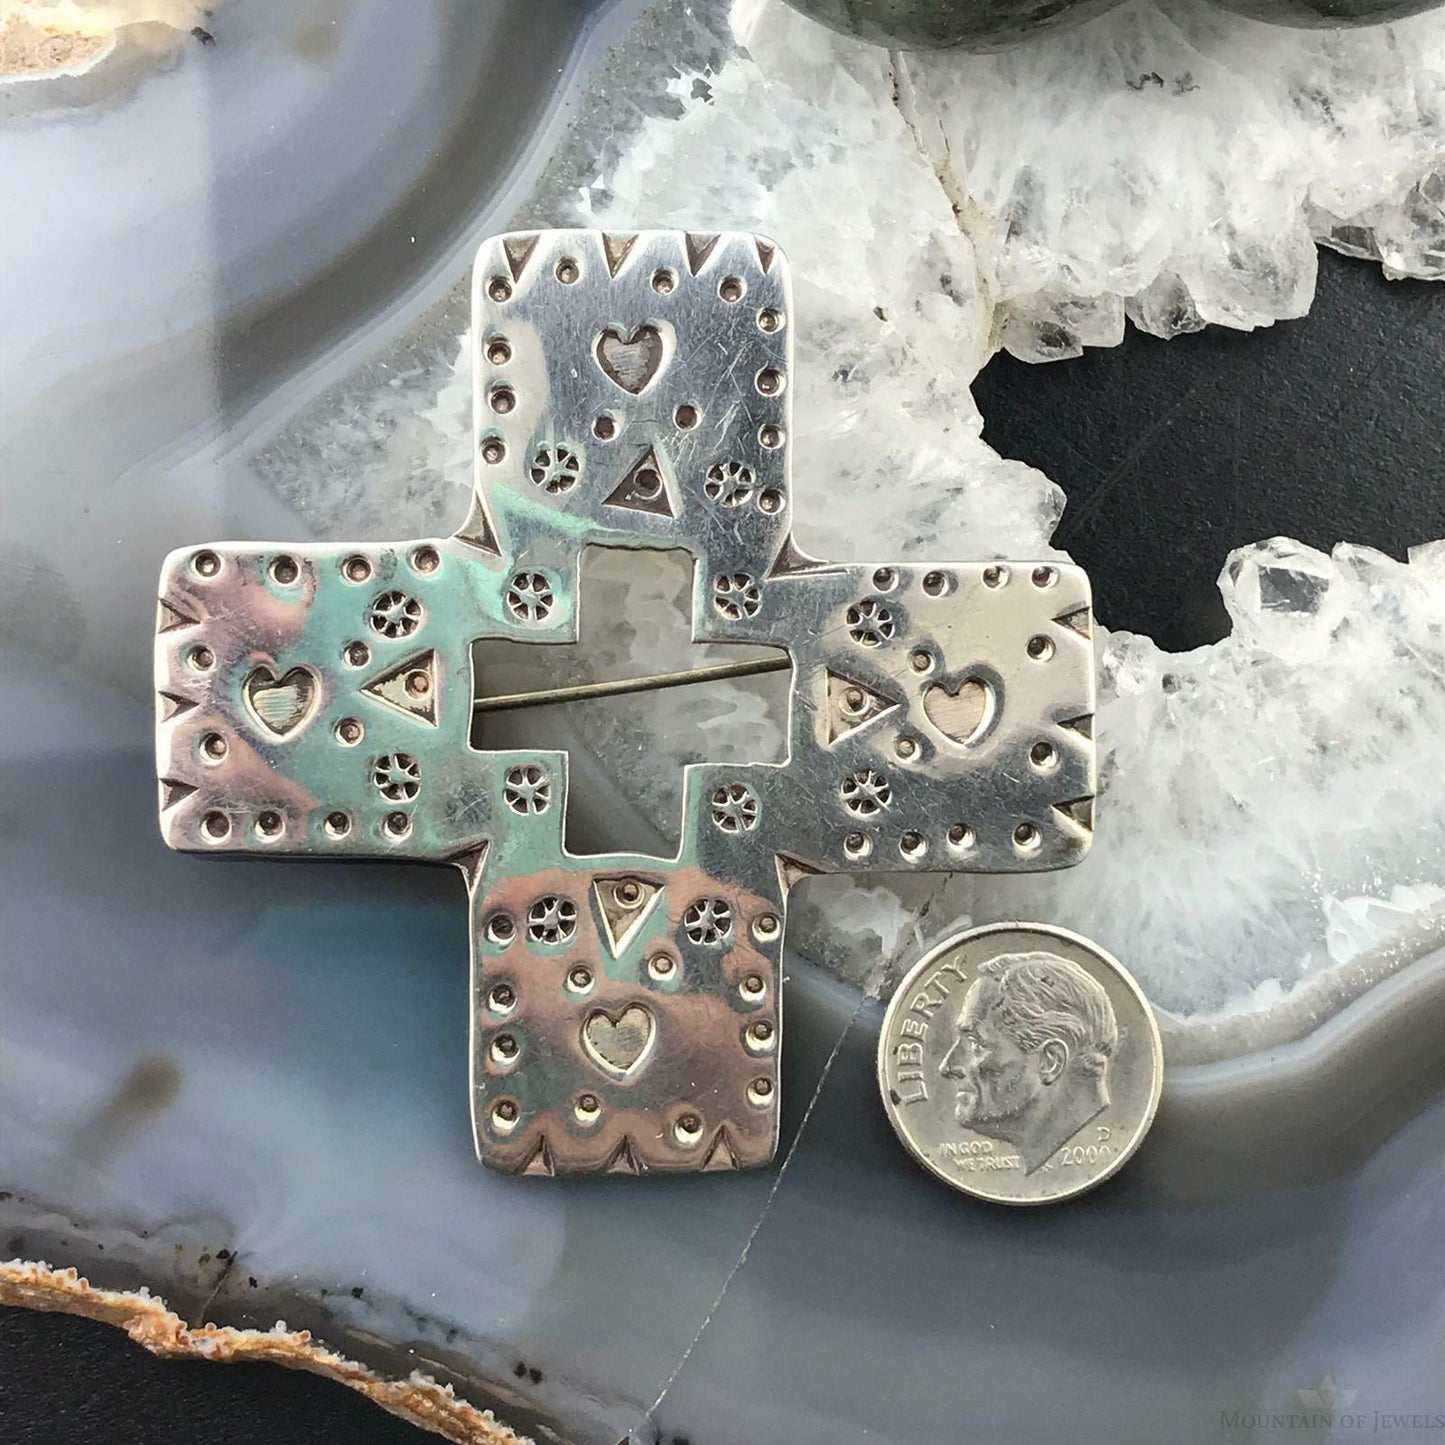 Silver Stamped Cross Brooch For Women or Men, Catholic Gift Religious Symbol